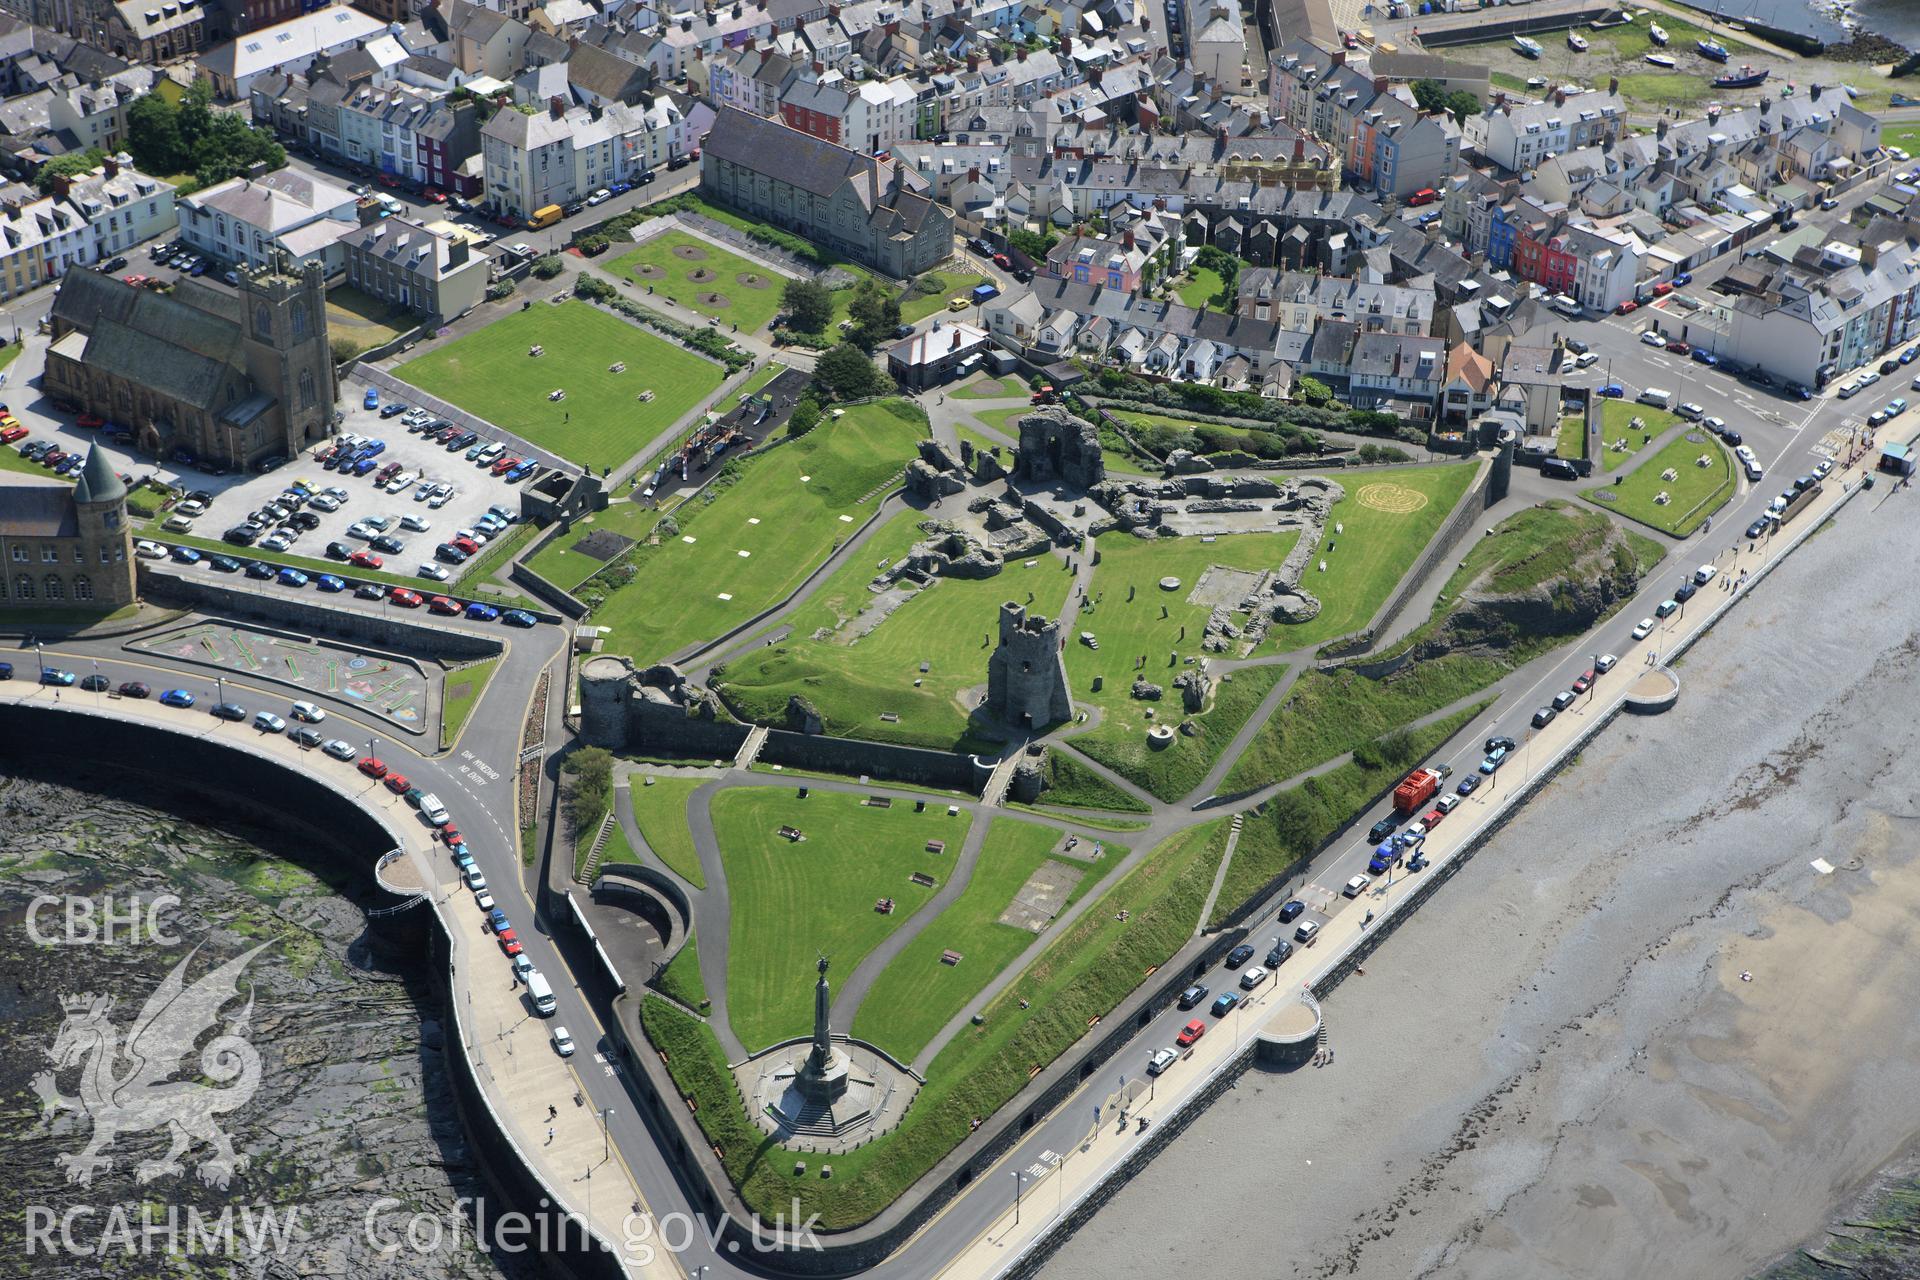 RCAHMW colour oblique aerial photograph of Aberystwyth Castle. Taken on 02 June 2009 by Toby Driver